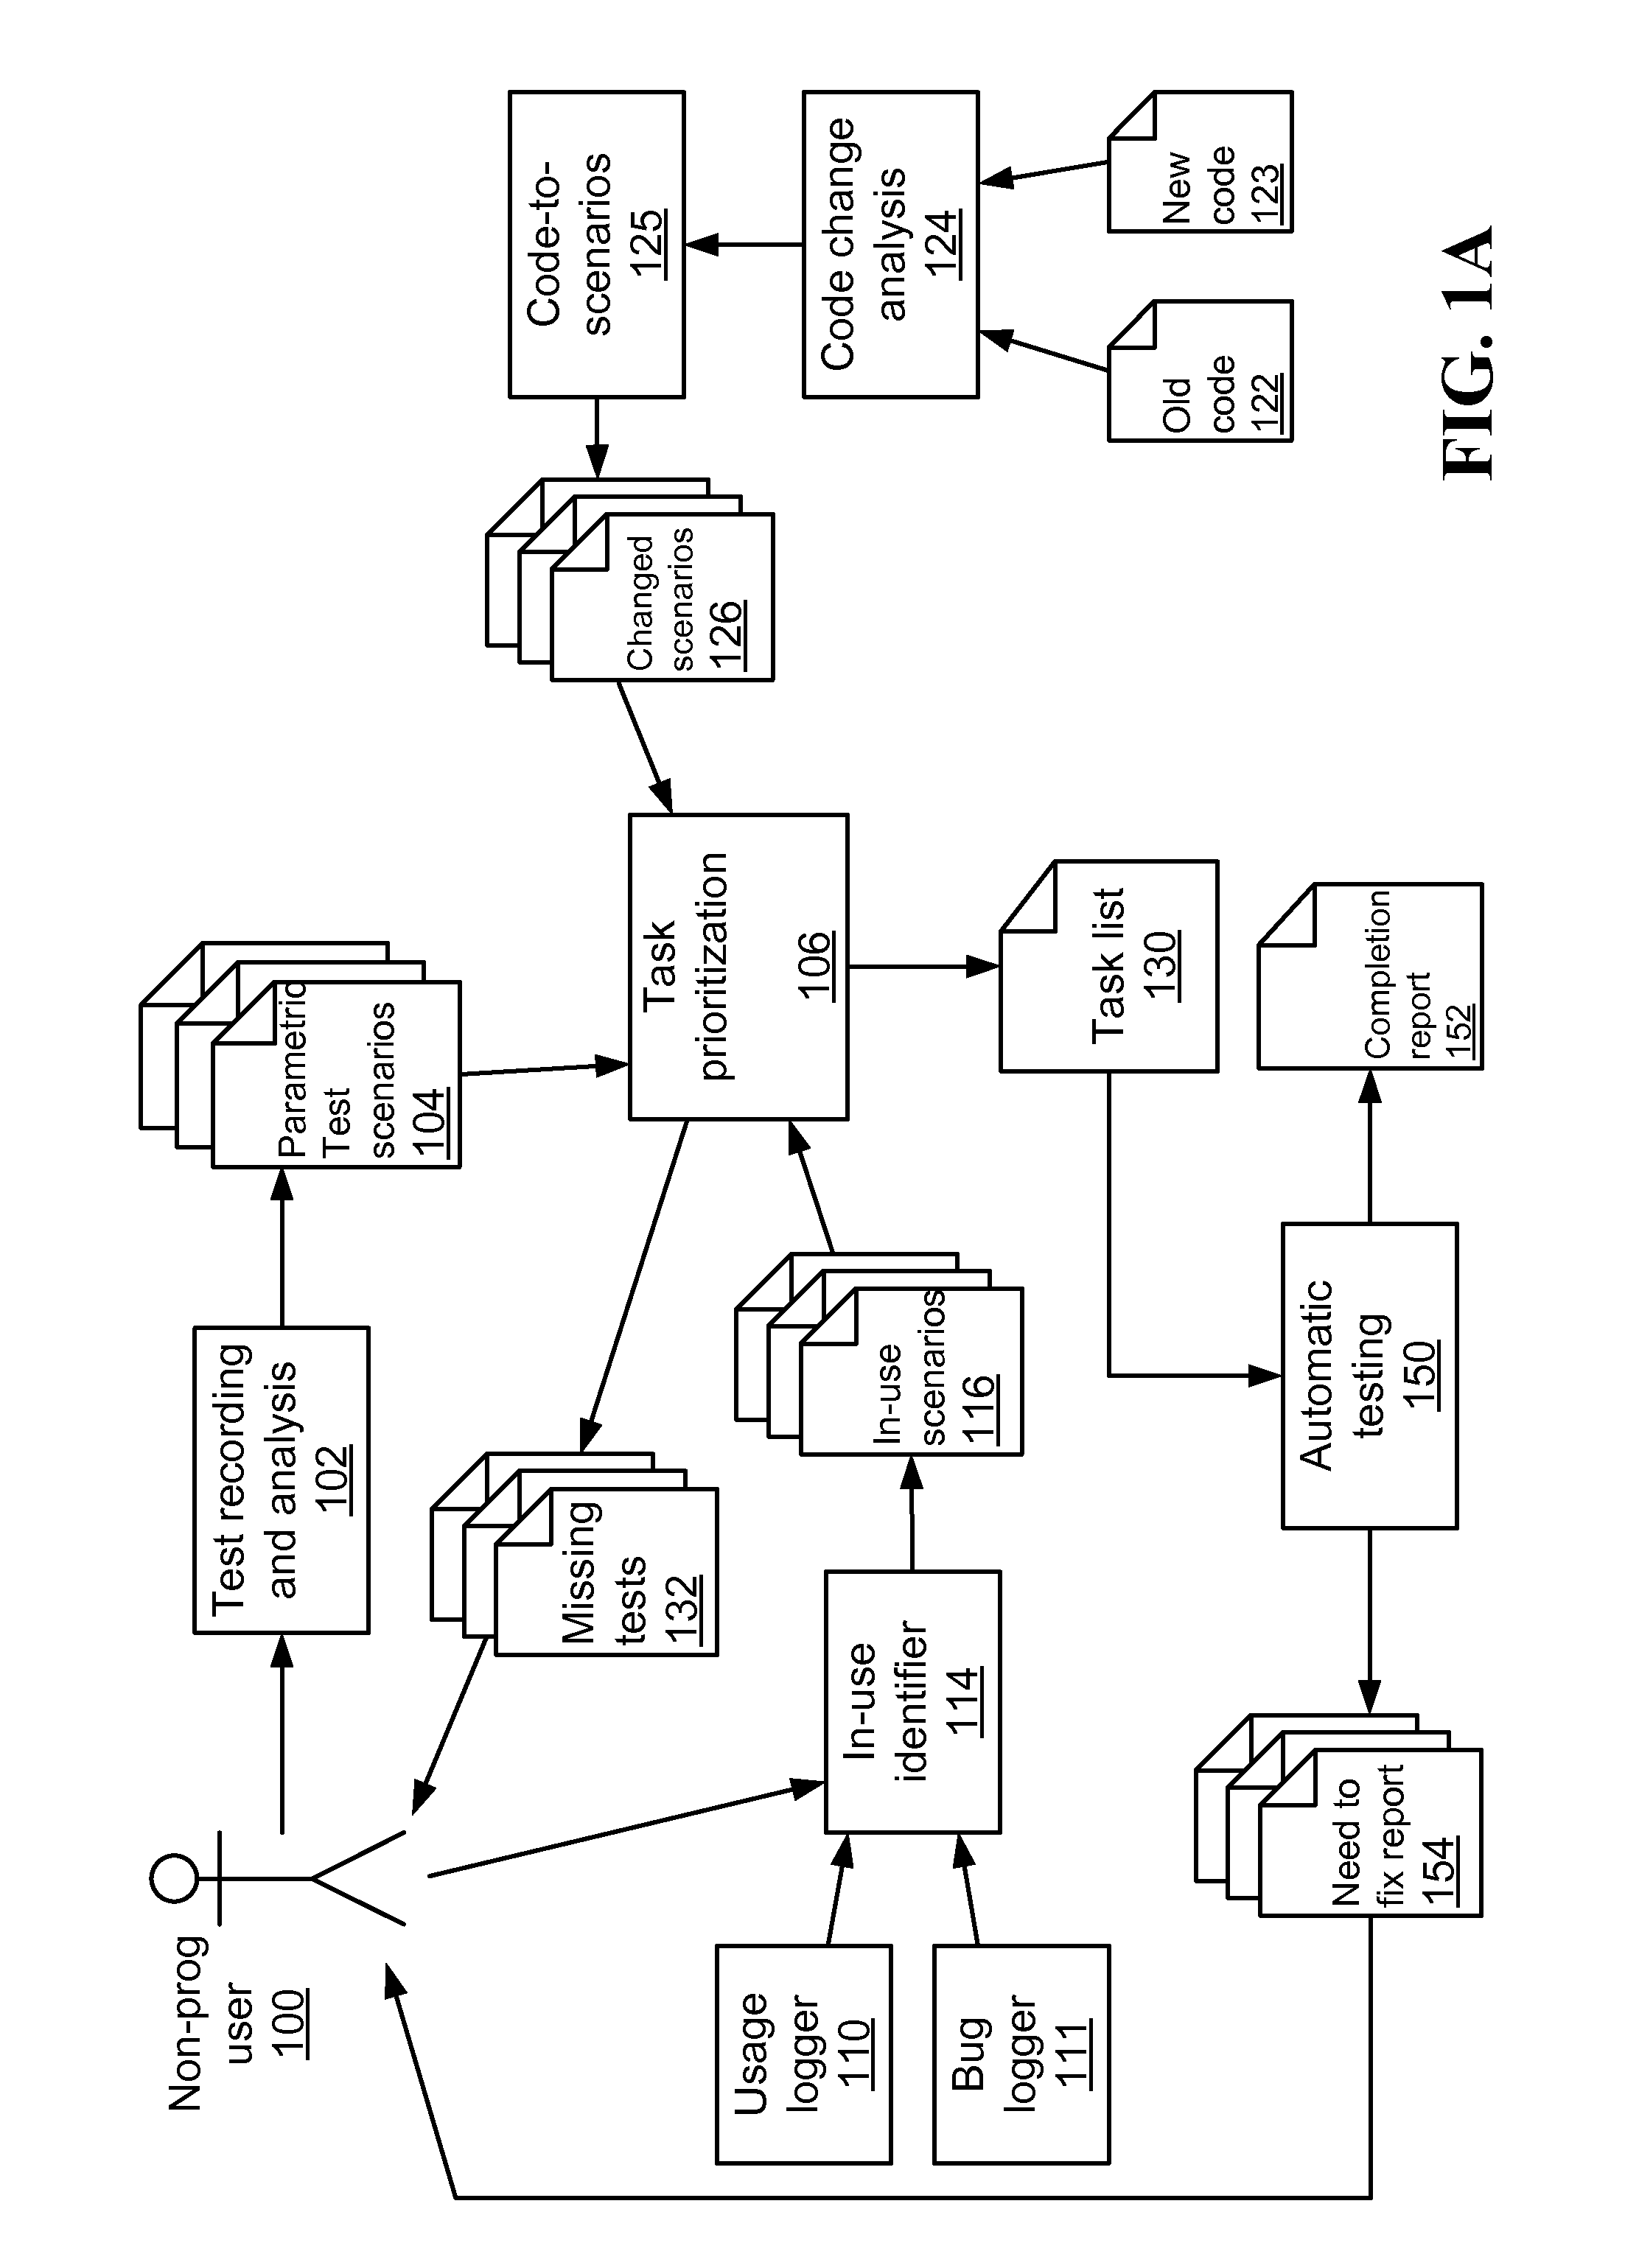 Method and system for semiautomatic execution of functioning test scenario